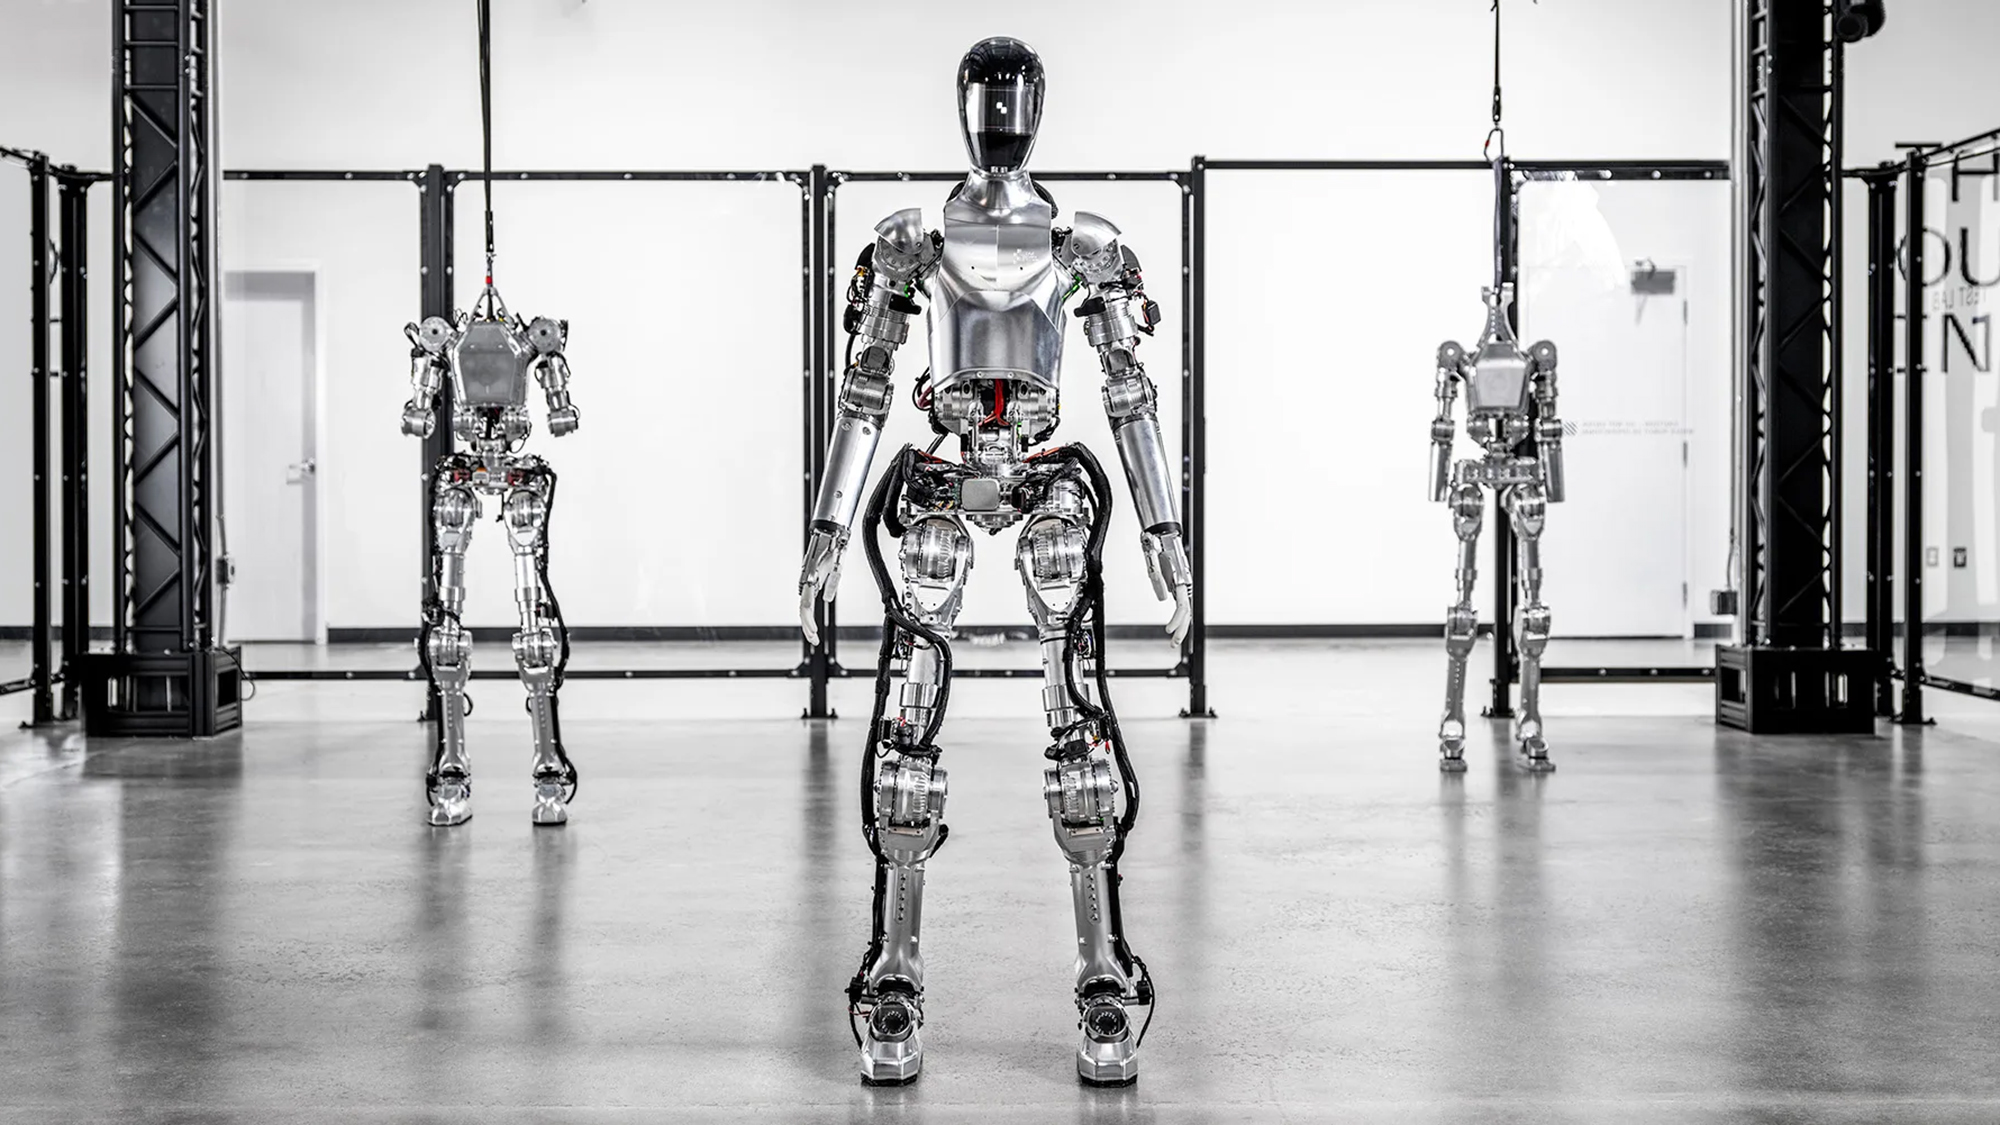 BMW plans to put humanoid robots in a South Carolina factory to do… something